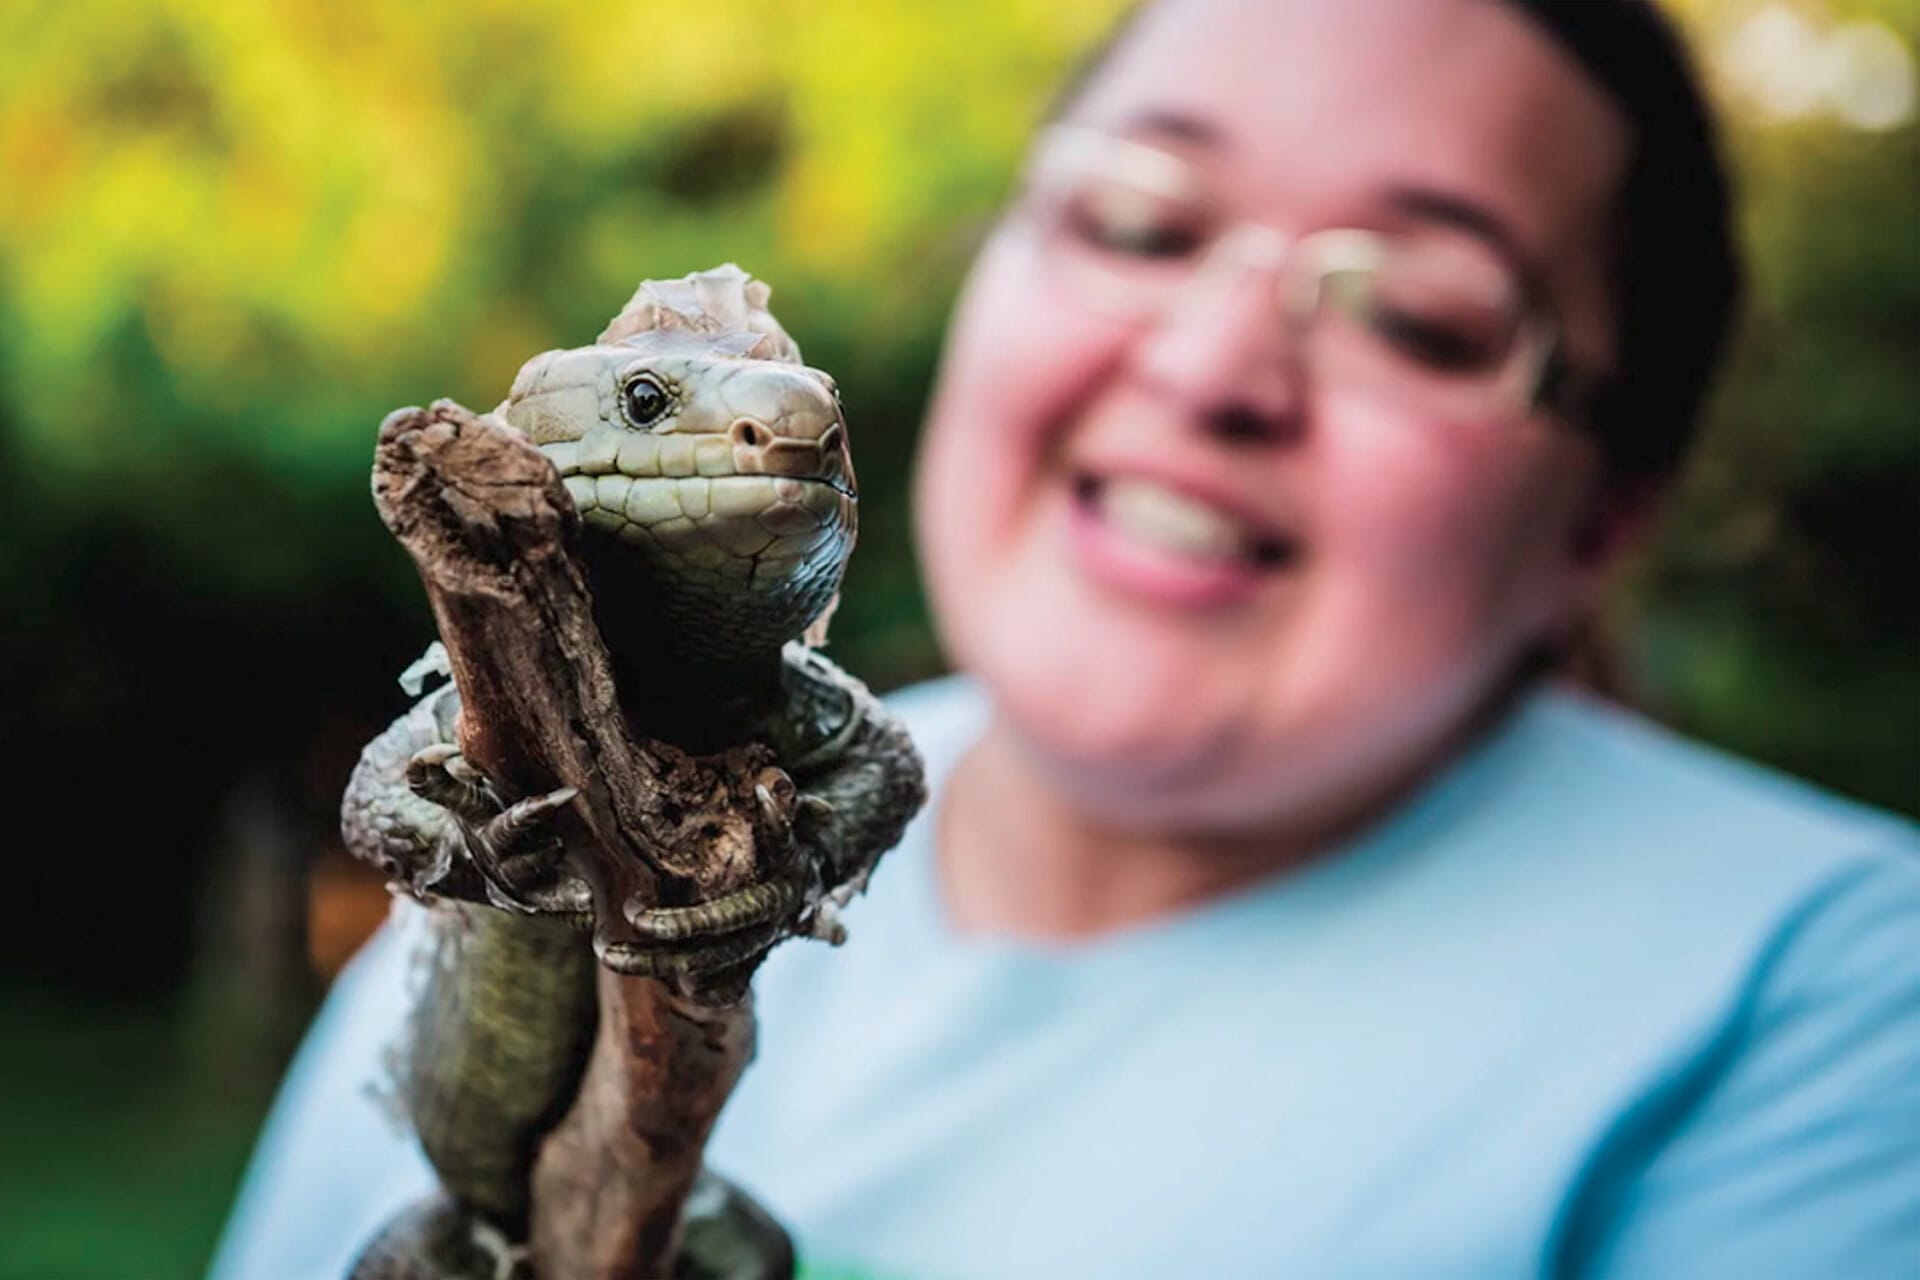 A Philadelphia Zoo staff member displays a reptile on a mobile exhibit.